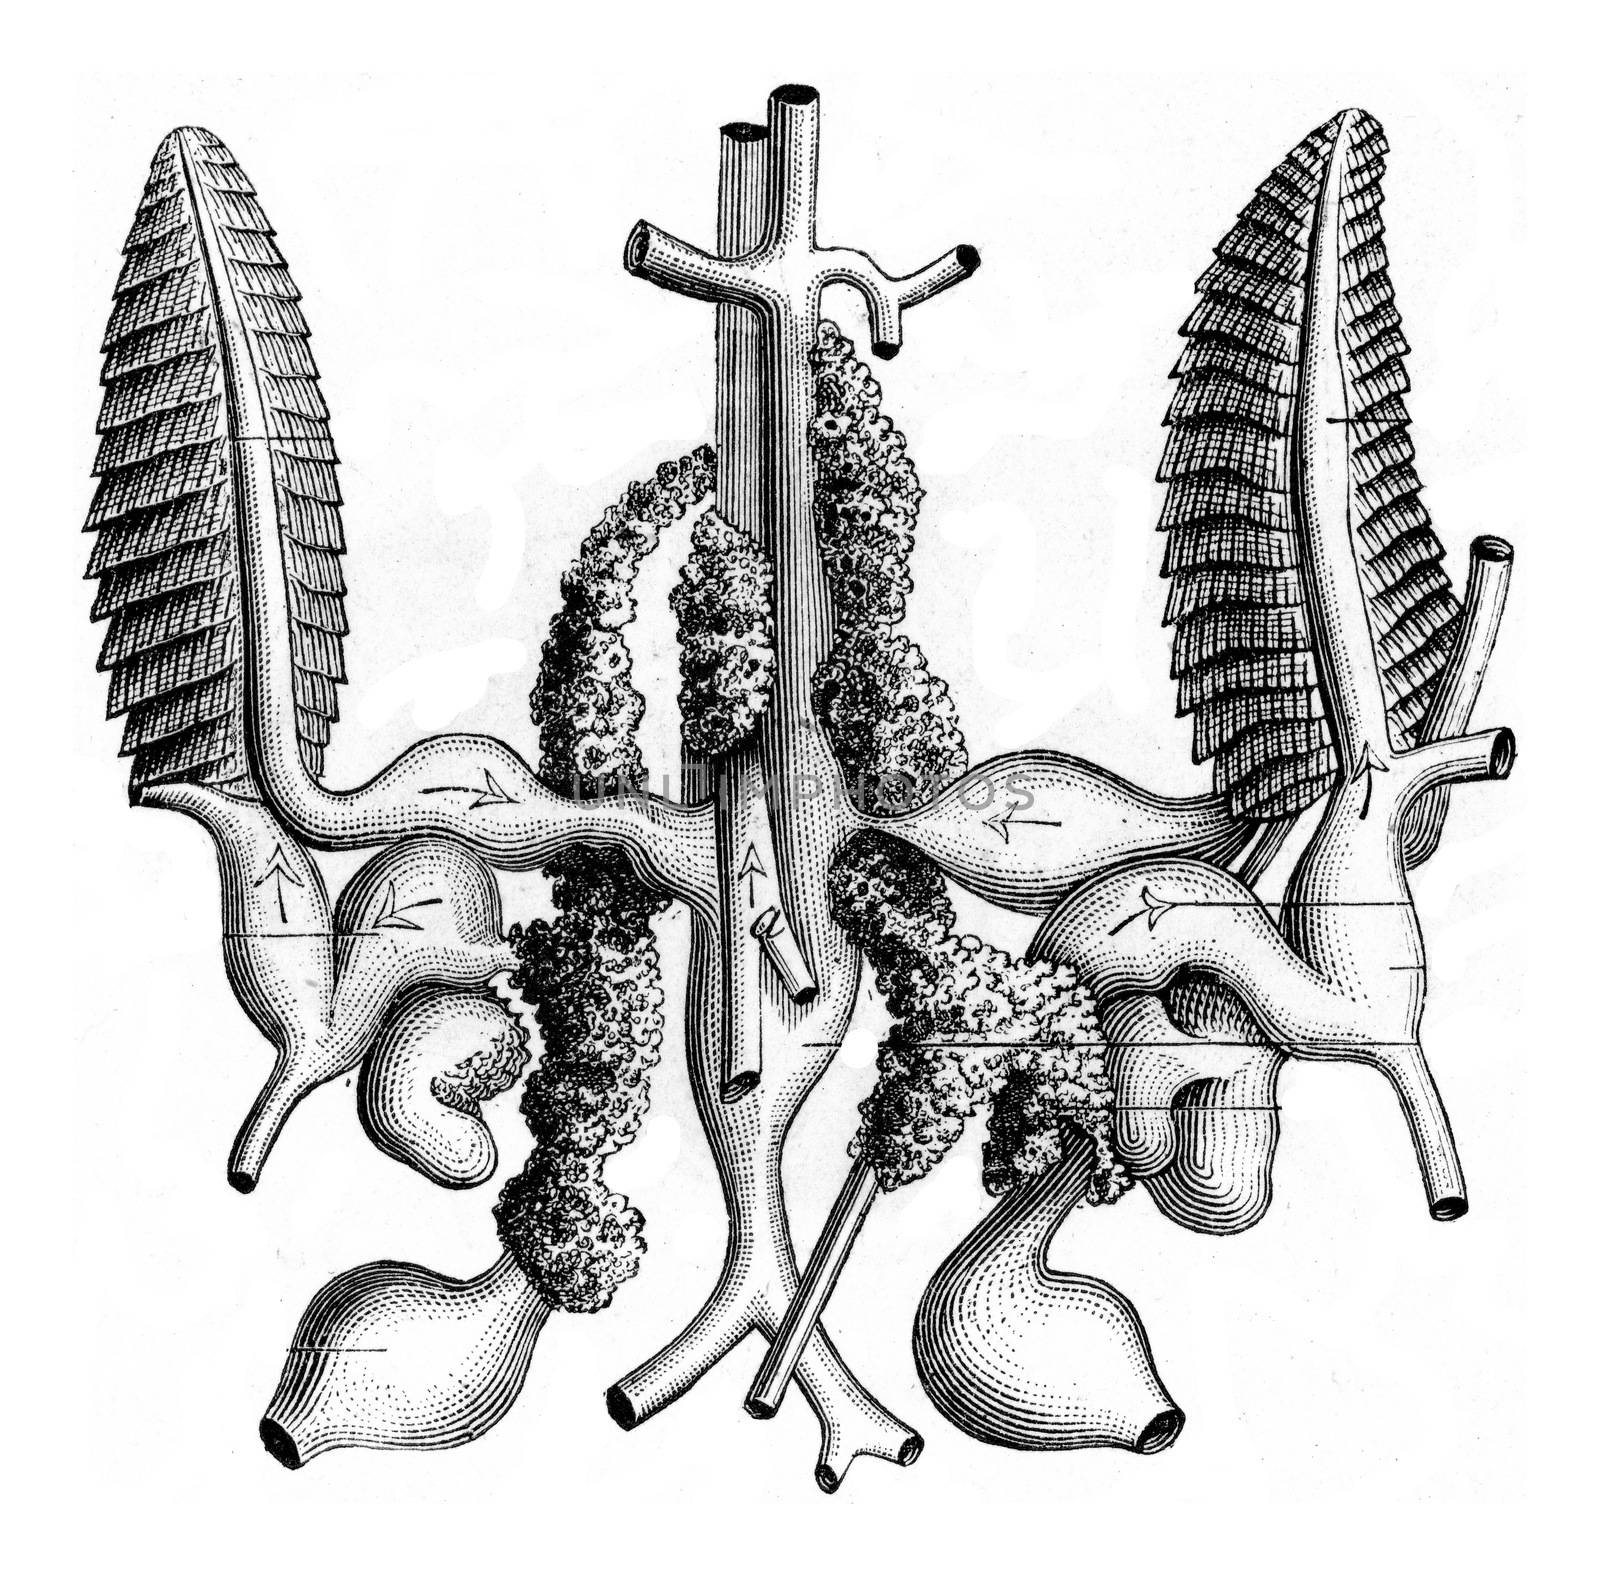 Gills and Circulatory System of Seiche, vintage engraved illustration. Zoology Elements from Paul Gervais.
